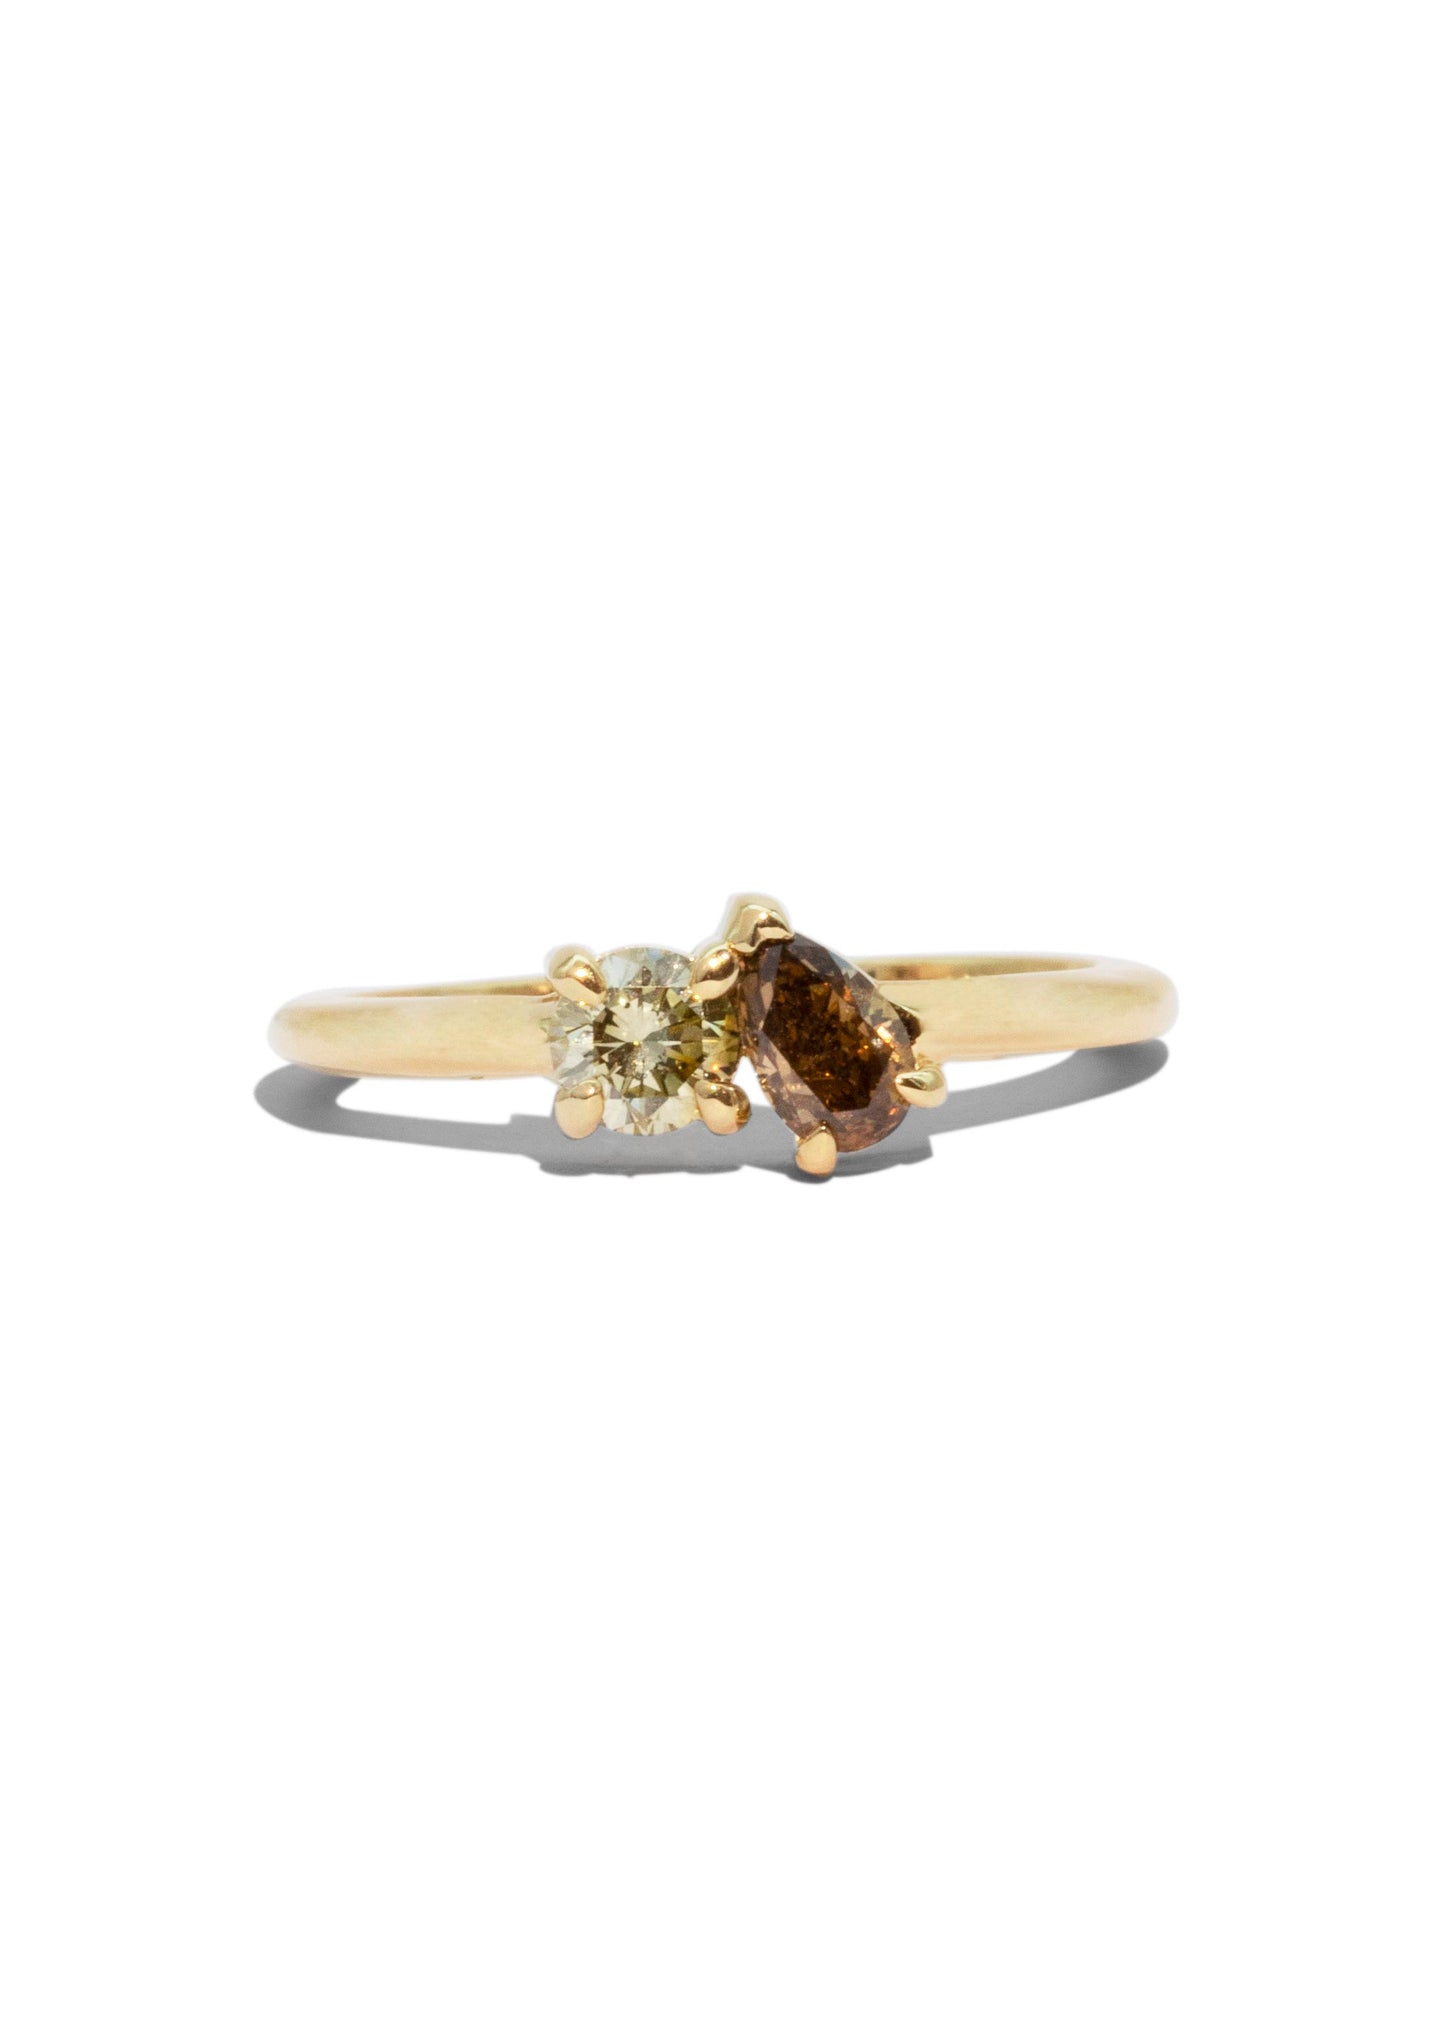 The Toi Et Moi 0.3ct Champagne and 0.37ct Cognac Diamond Ring